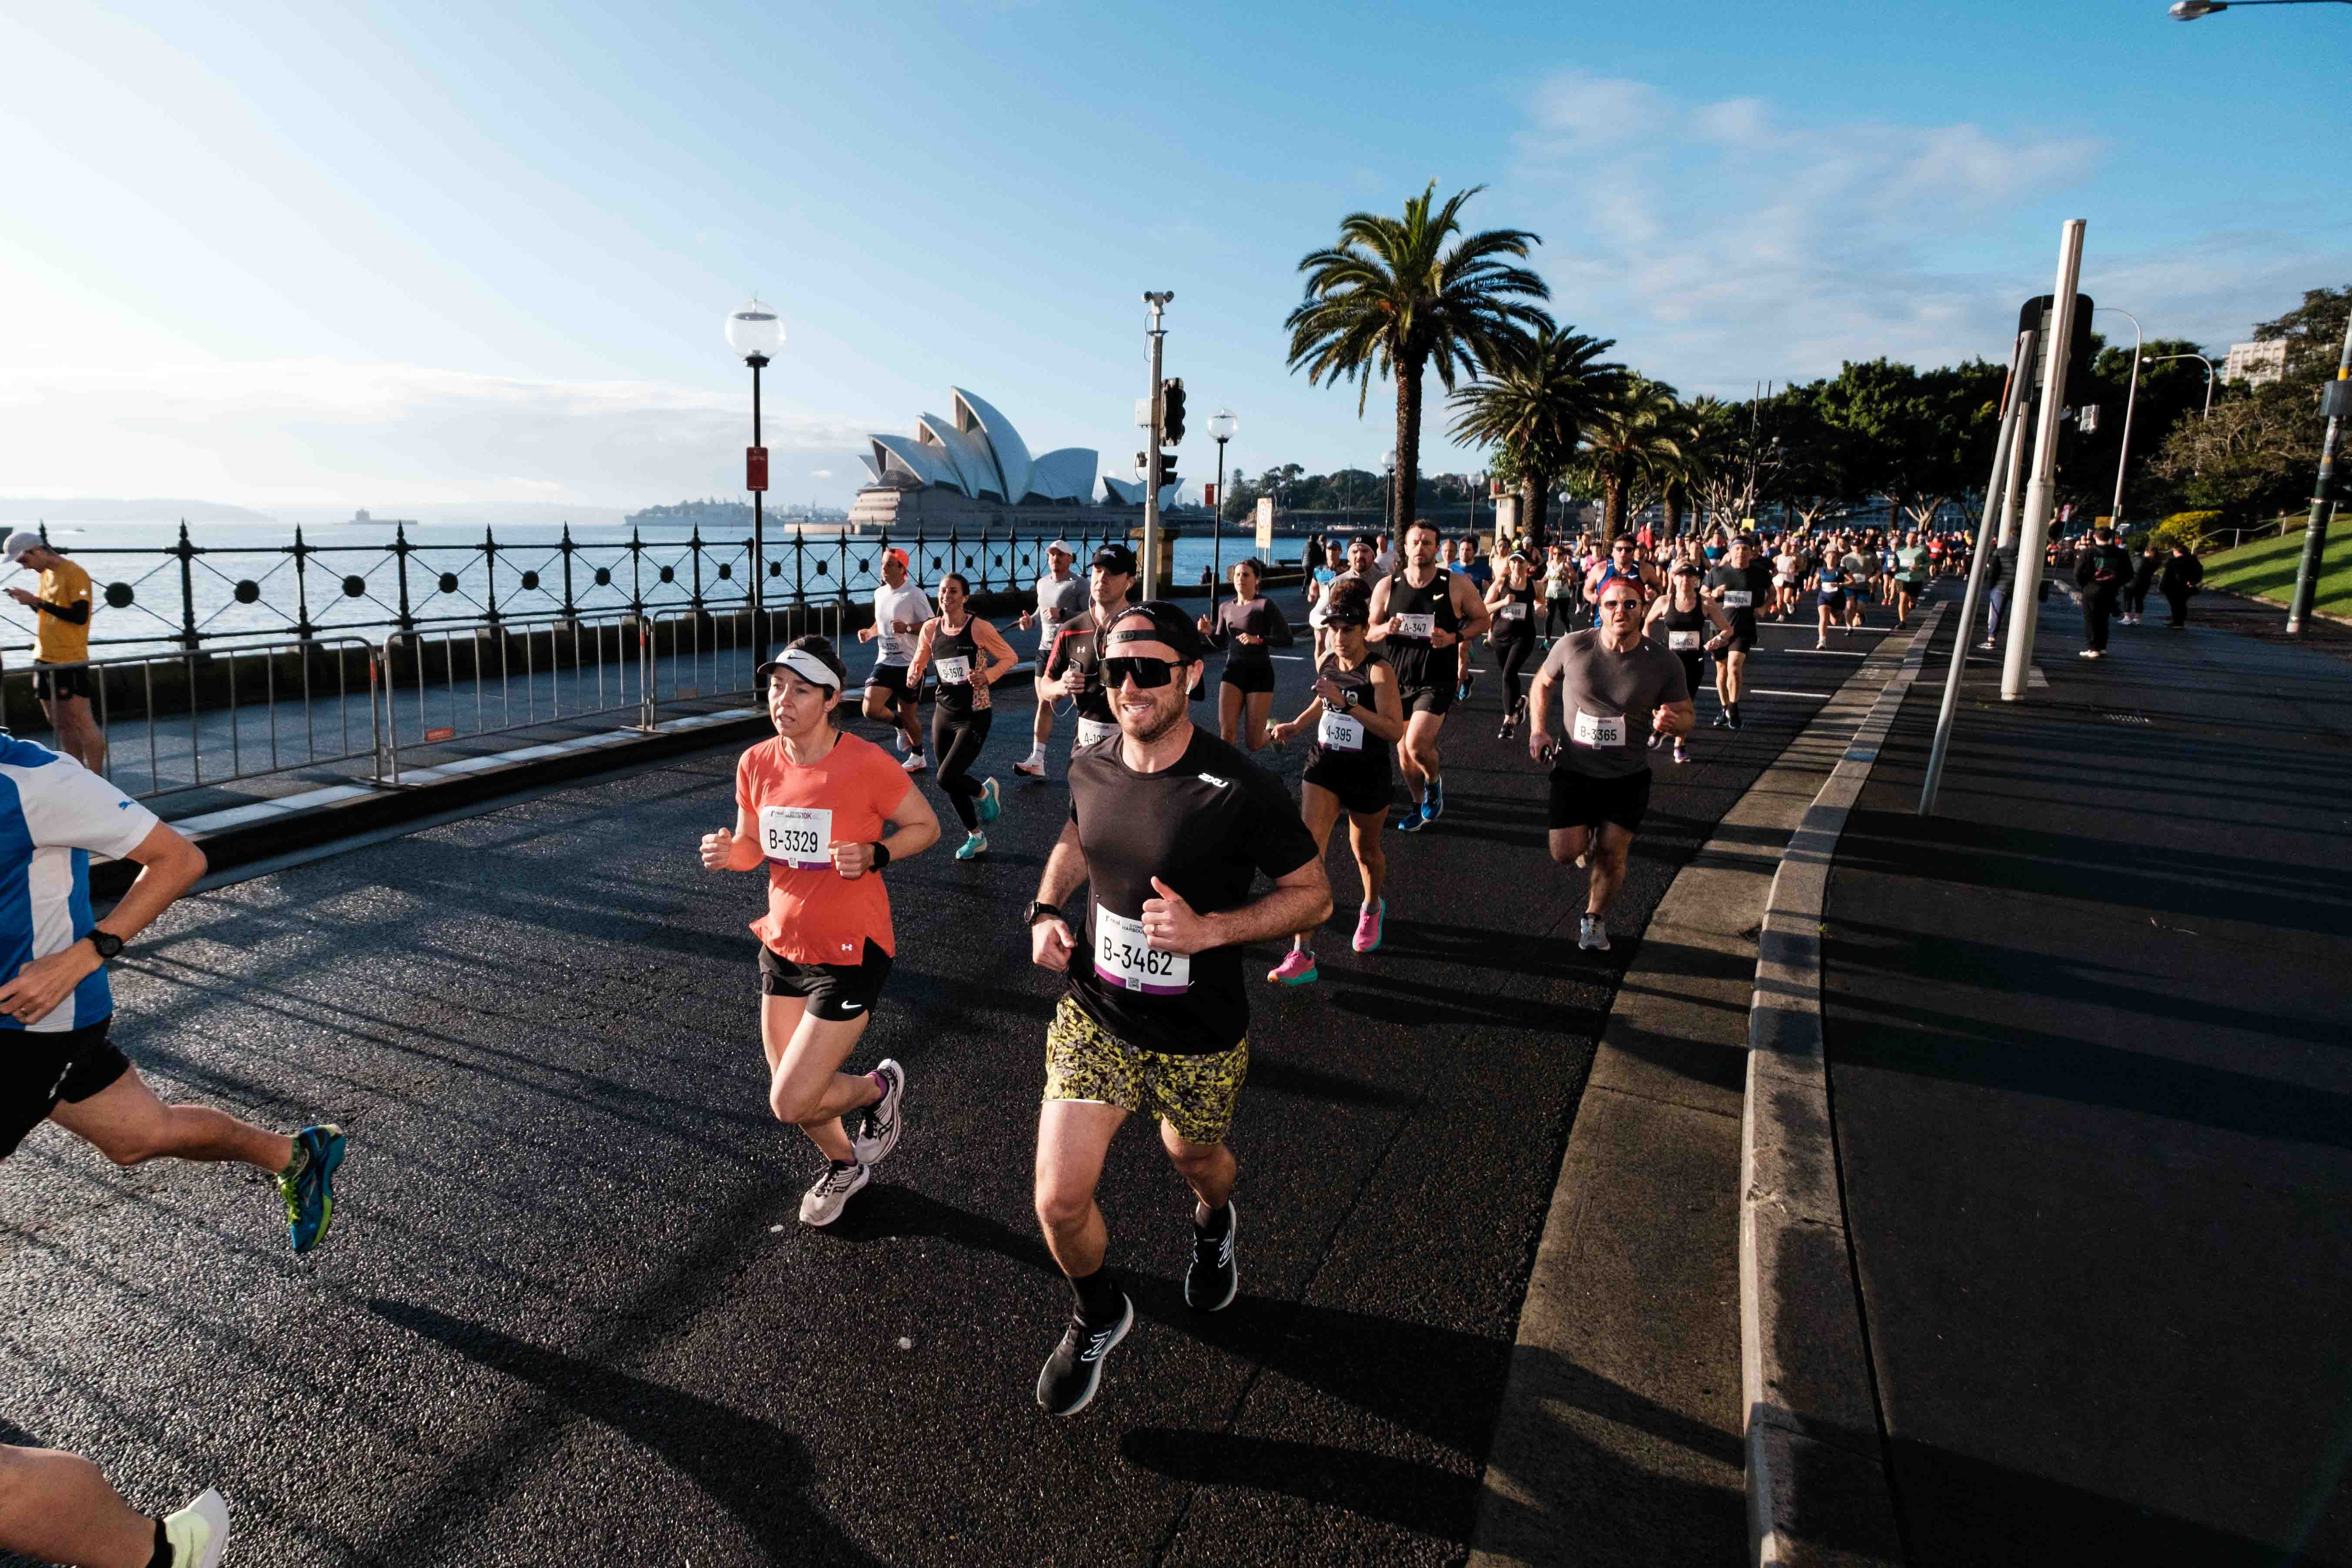 The hottest running event this Winter is back & rego is now open